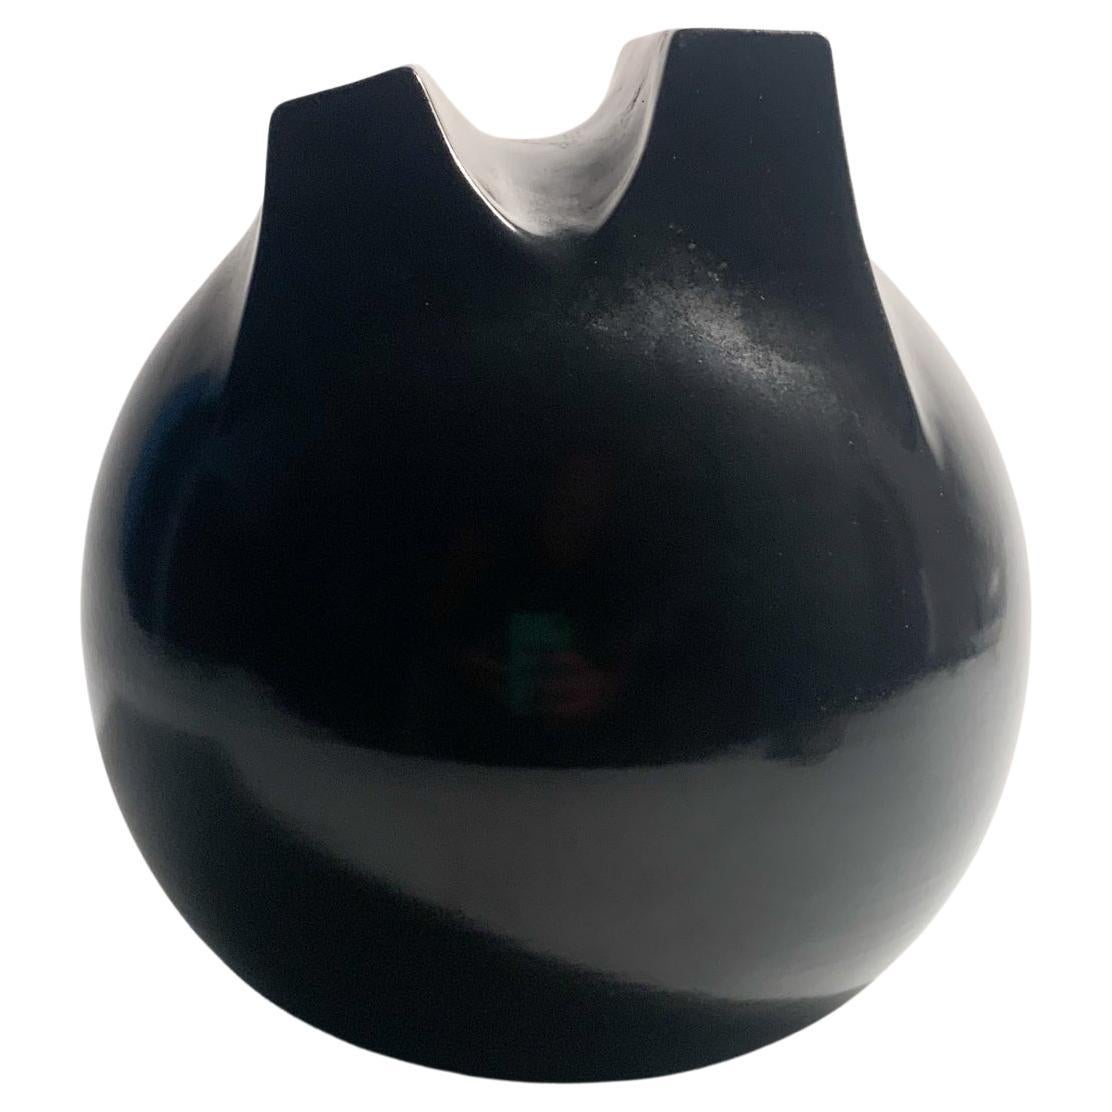 Whistle Ceramic Vase with Double Mouth by Franco Bucci from the 1970s For Sale